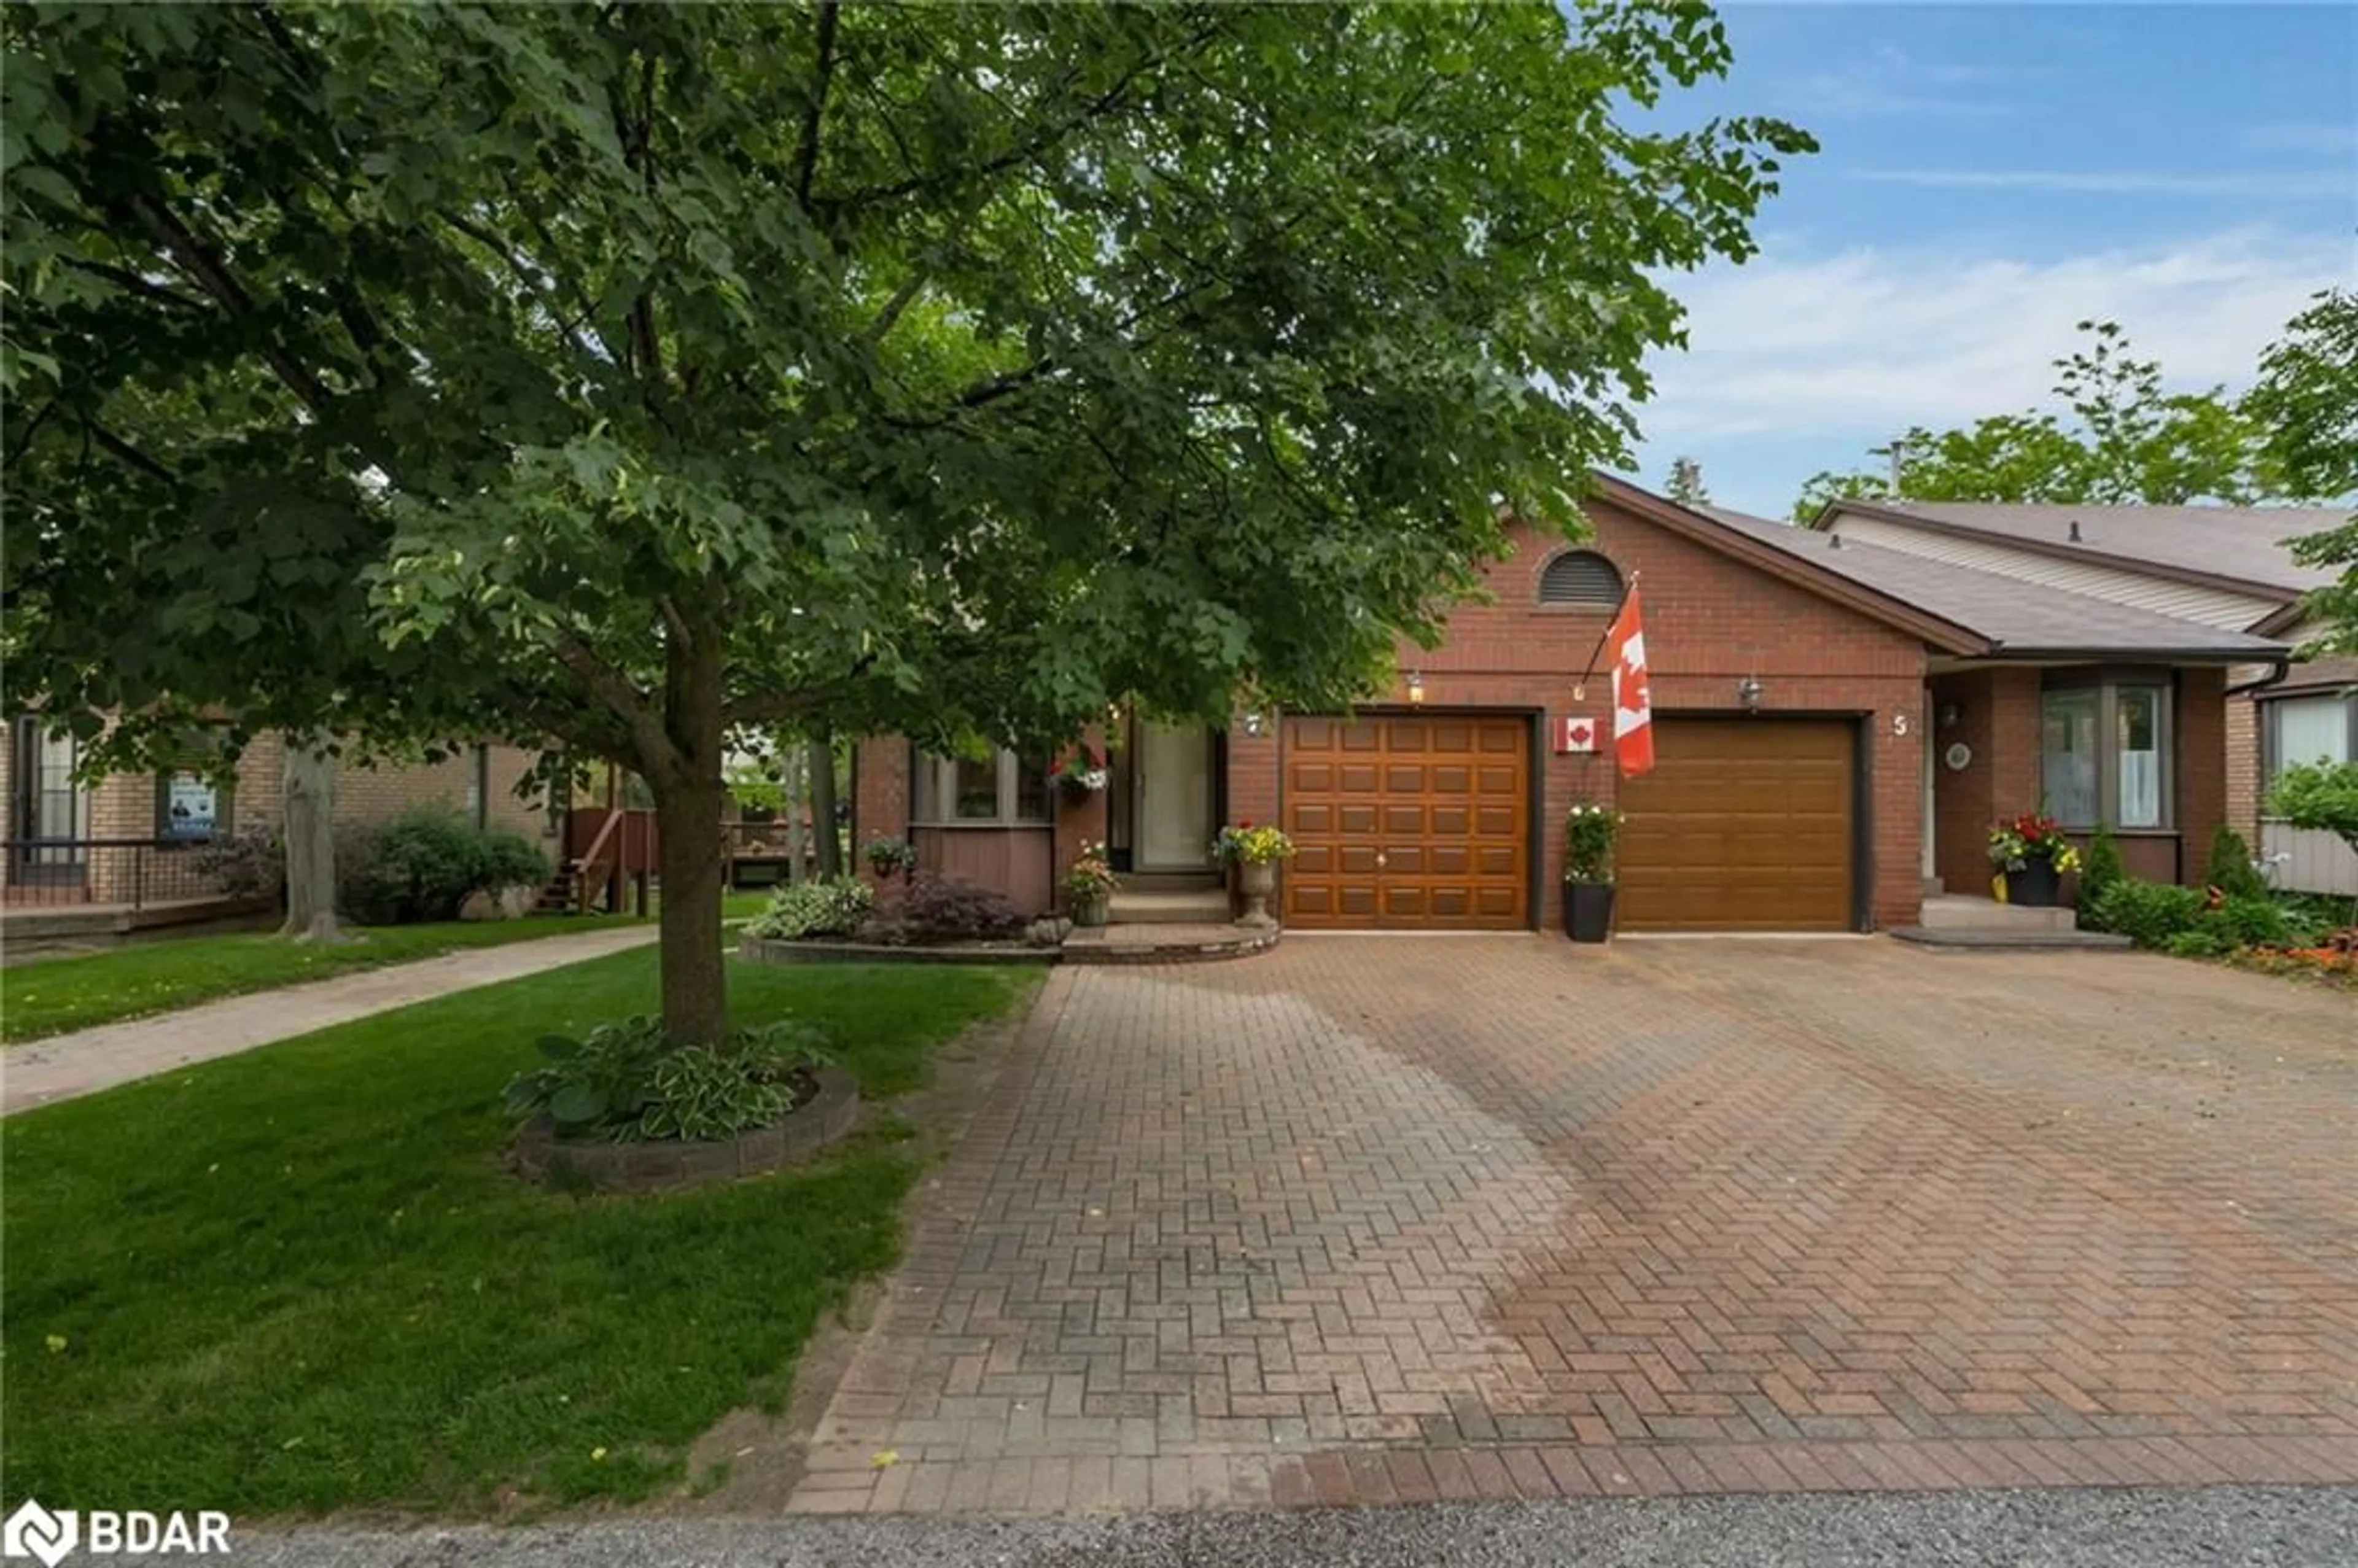 Home with brick exterior material for 7 Briarwood Dr #31, Alliston Ontario L9R 1S2